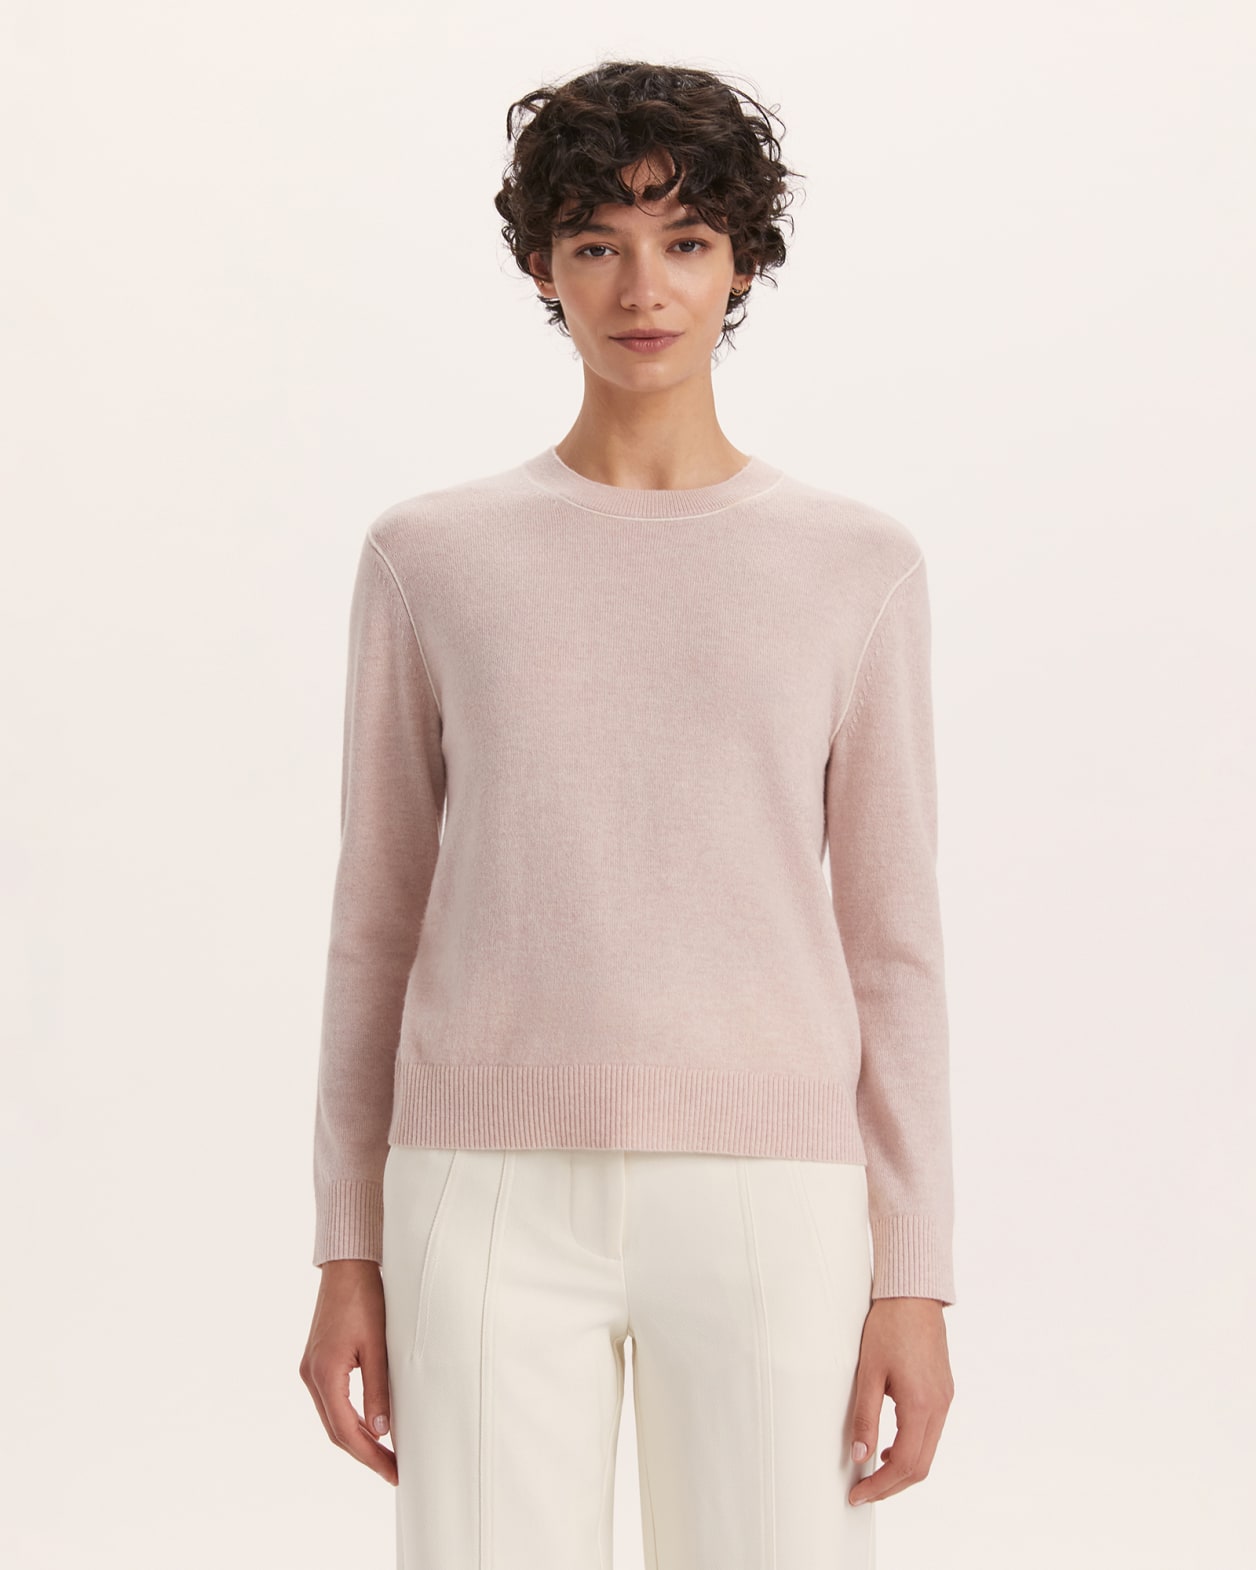 Nora Wool Cashmere Contrast Sweater in DUSTY ROSE